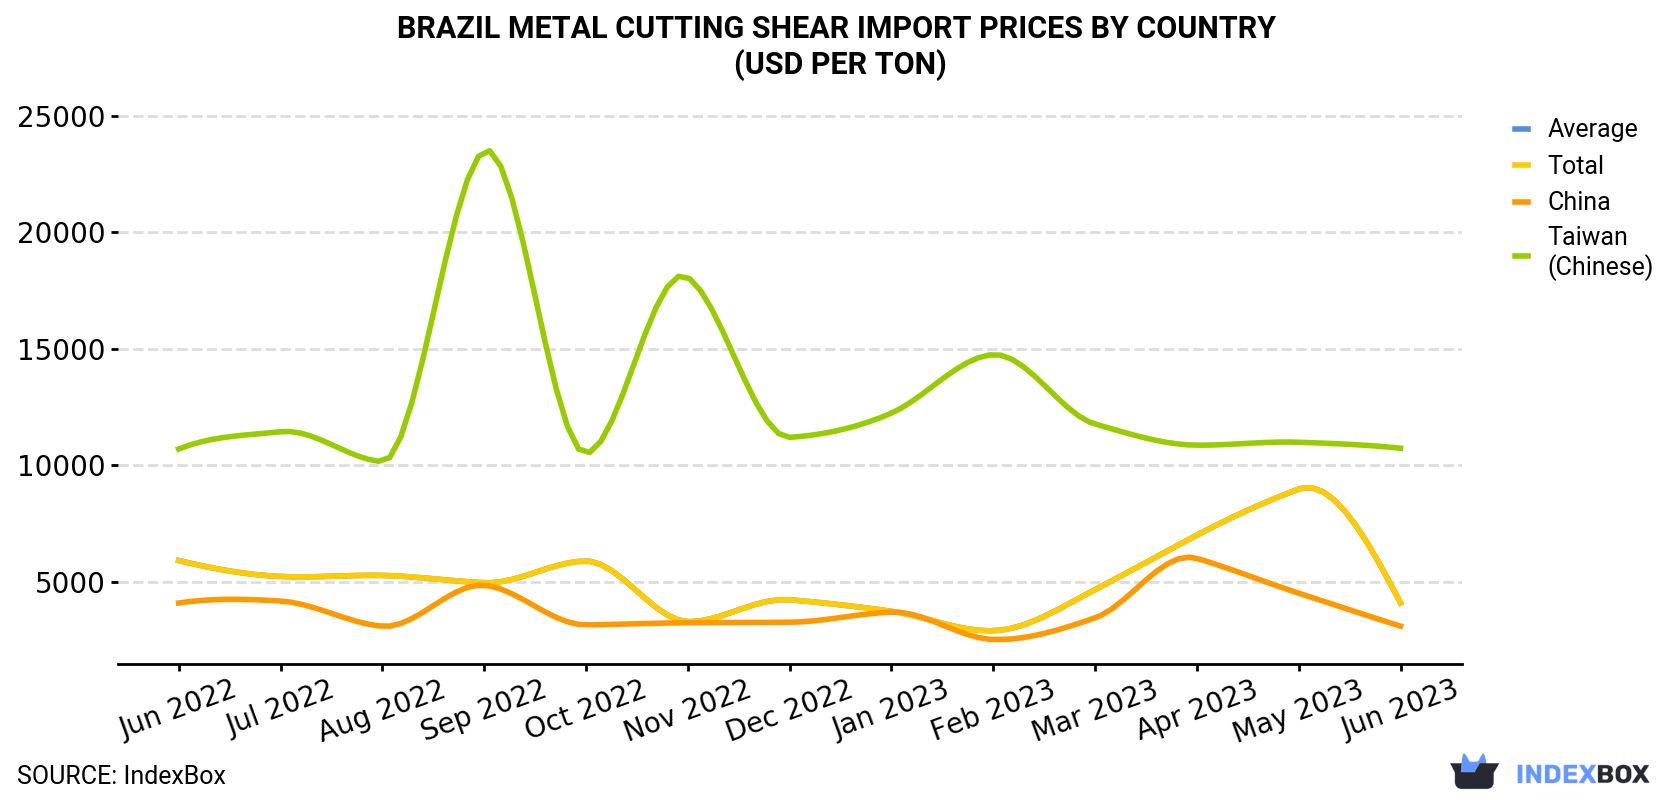 Brazil Metal Cutting Shear Import Prices By Country (USD Per Ton)